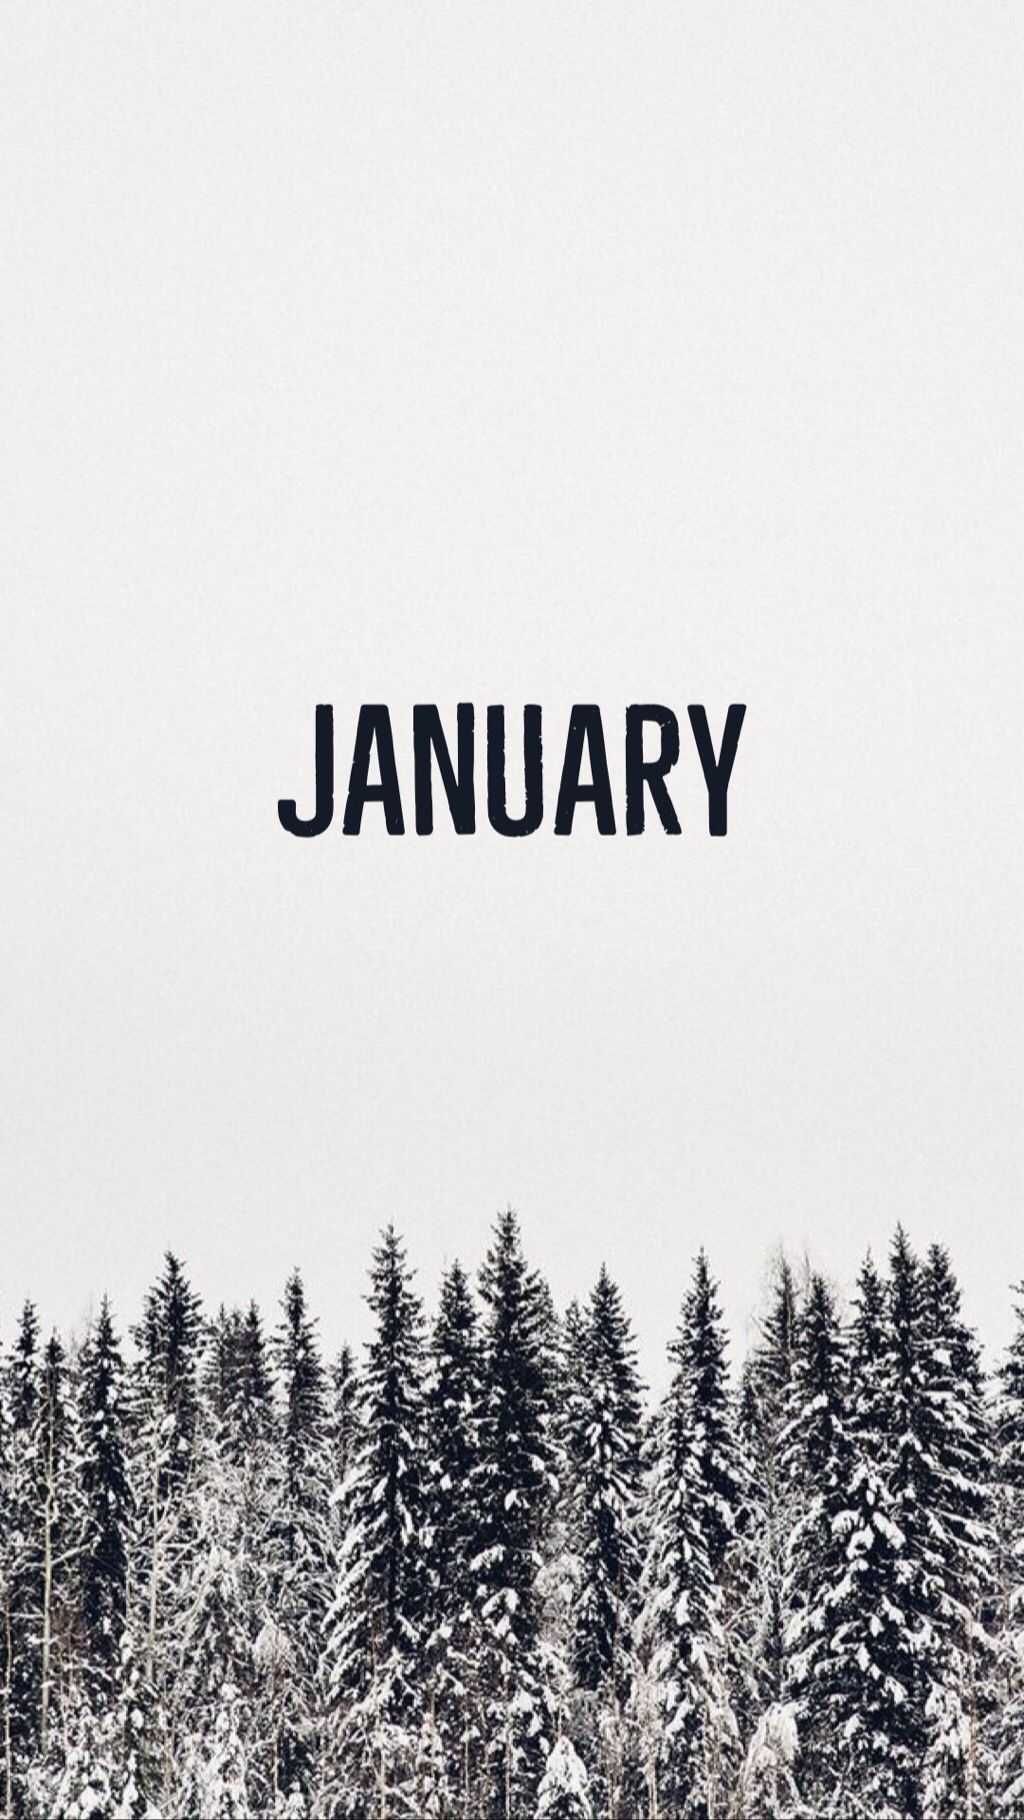 January wallpaper discover more day first day gregorian january julian wallpapers httpswwwwâ january wallpaper iphone wallpaper winter winter wallpaper